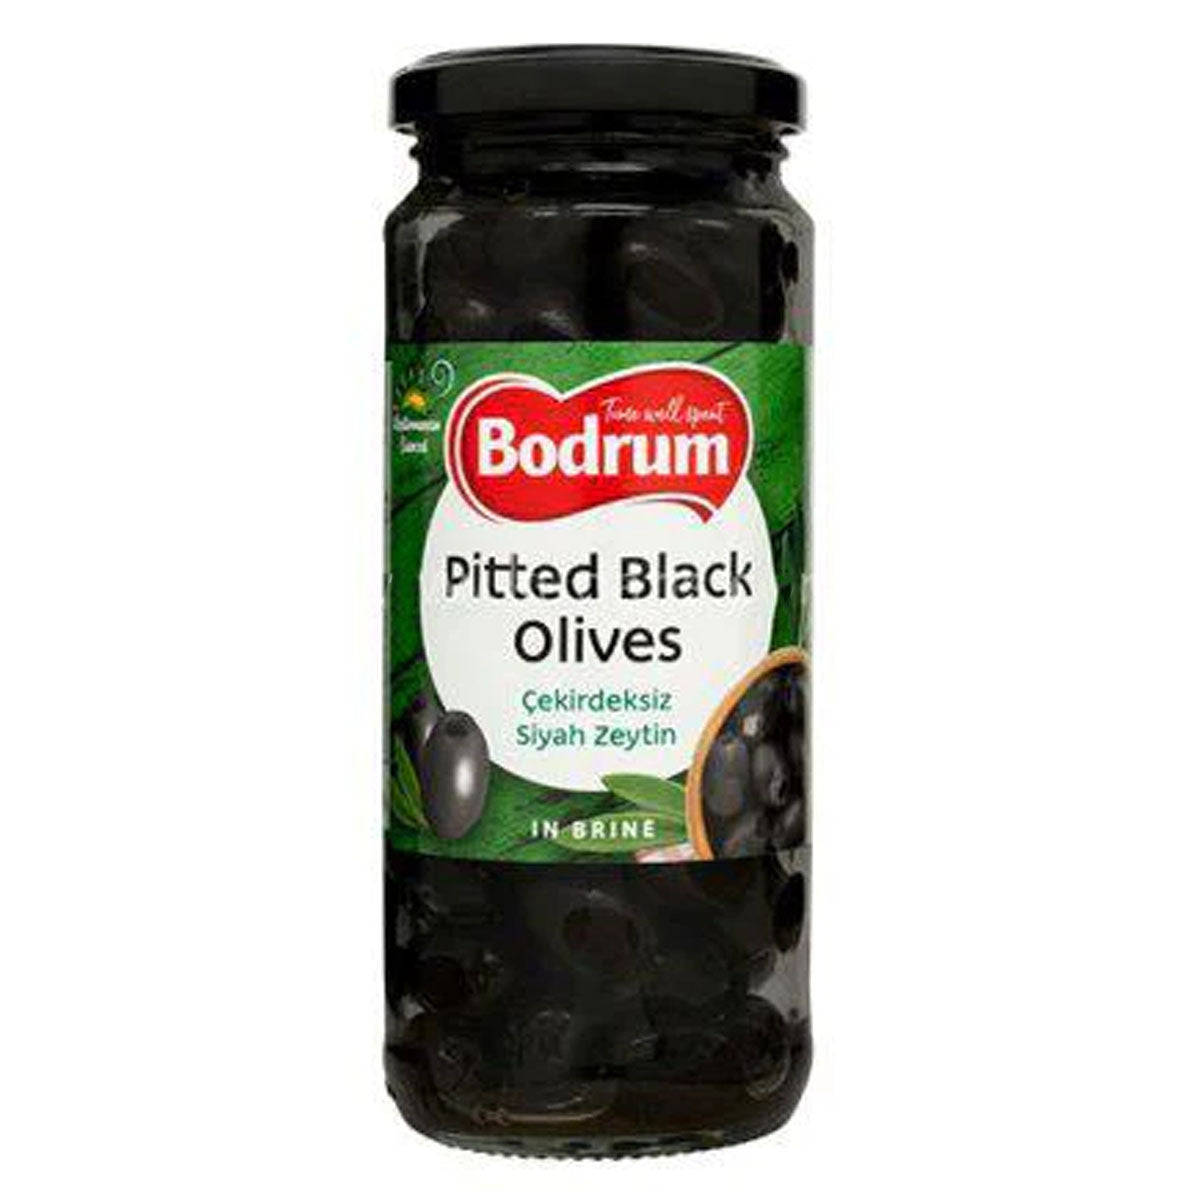 A jar of Bodrum - Pitted Black Olive - 330g on a white background.